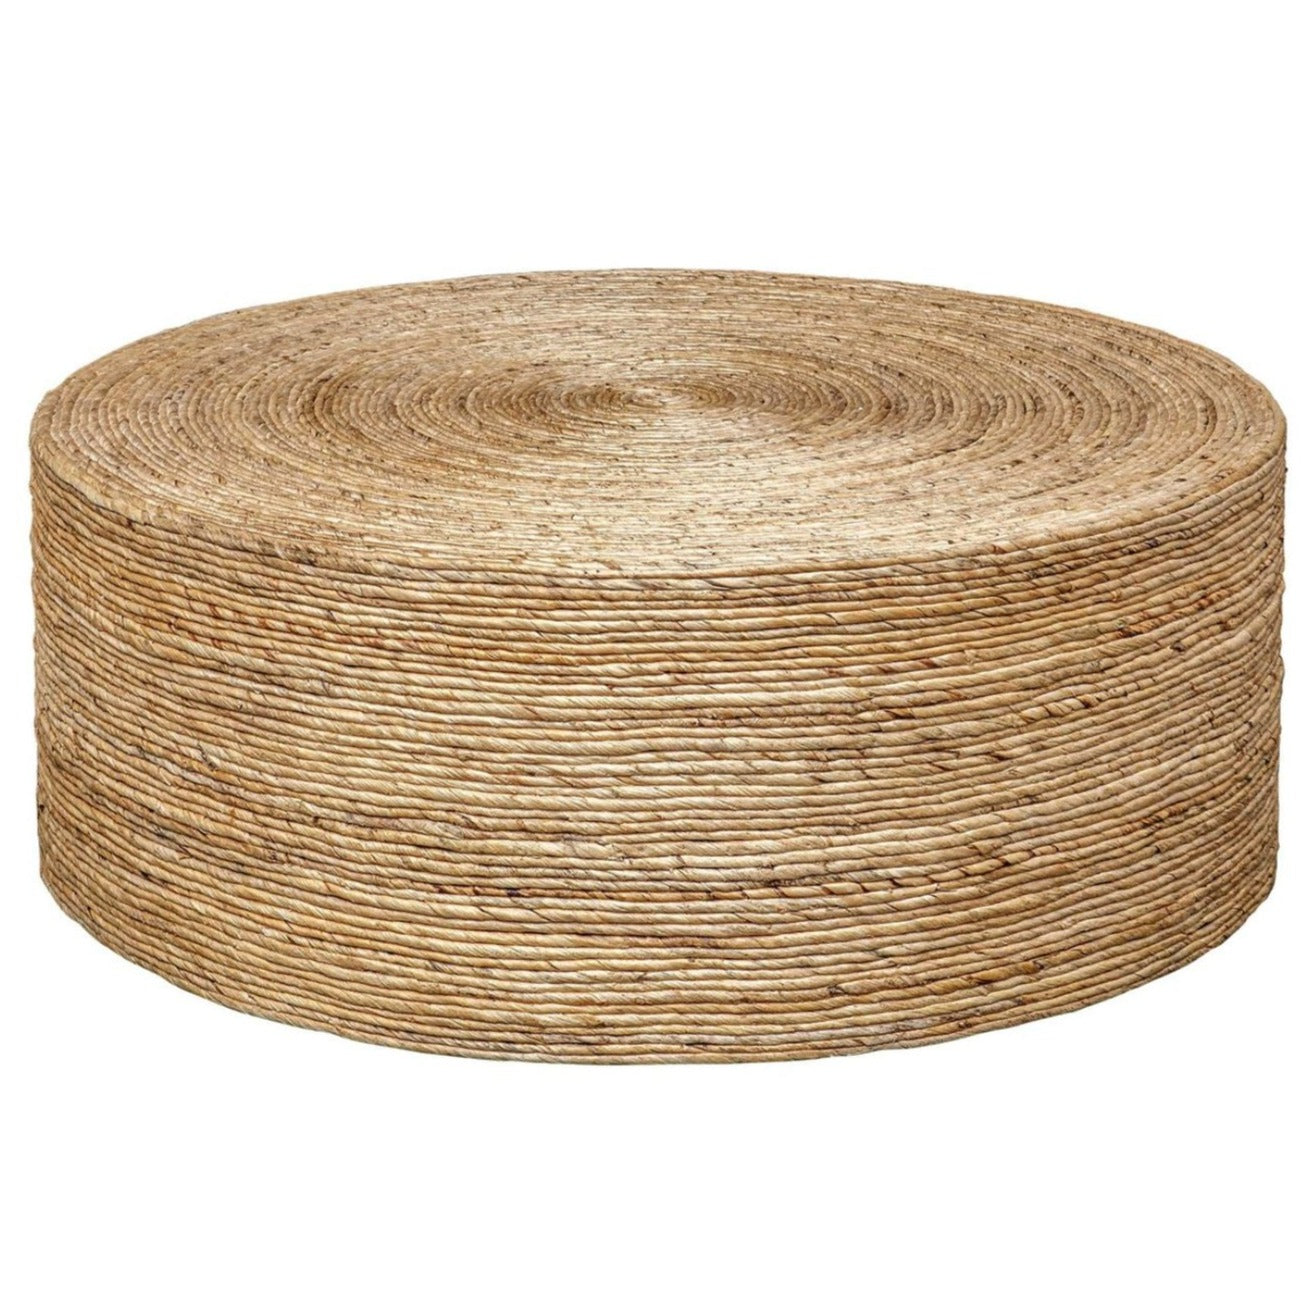 Light brown, round coffee table made with woven banana.